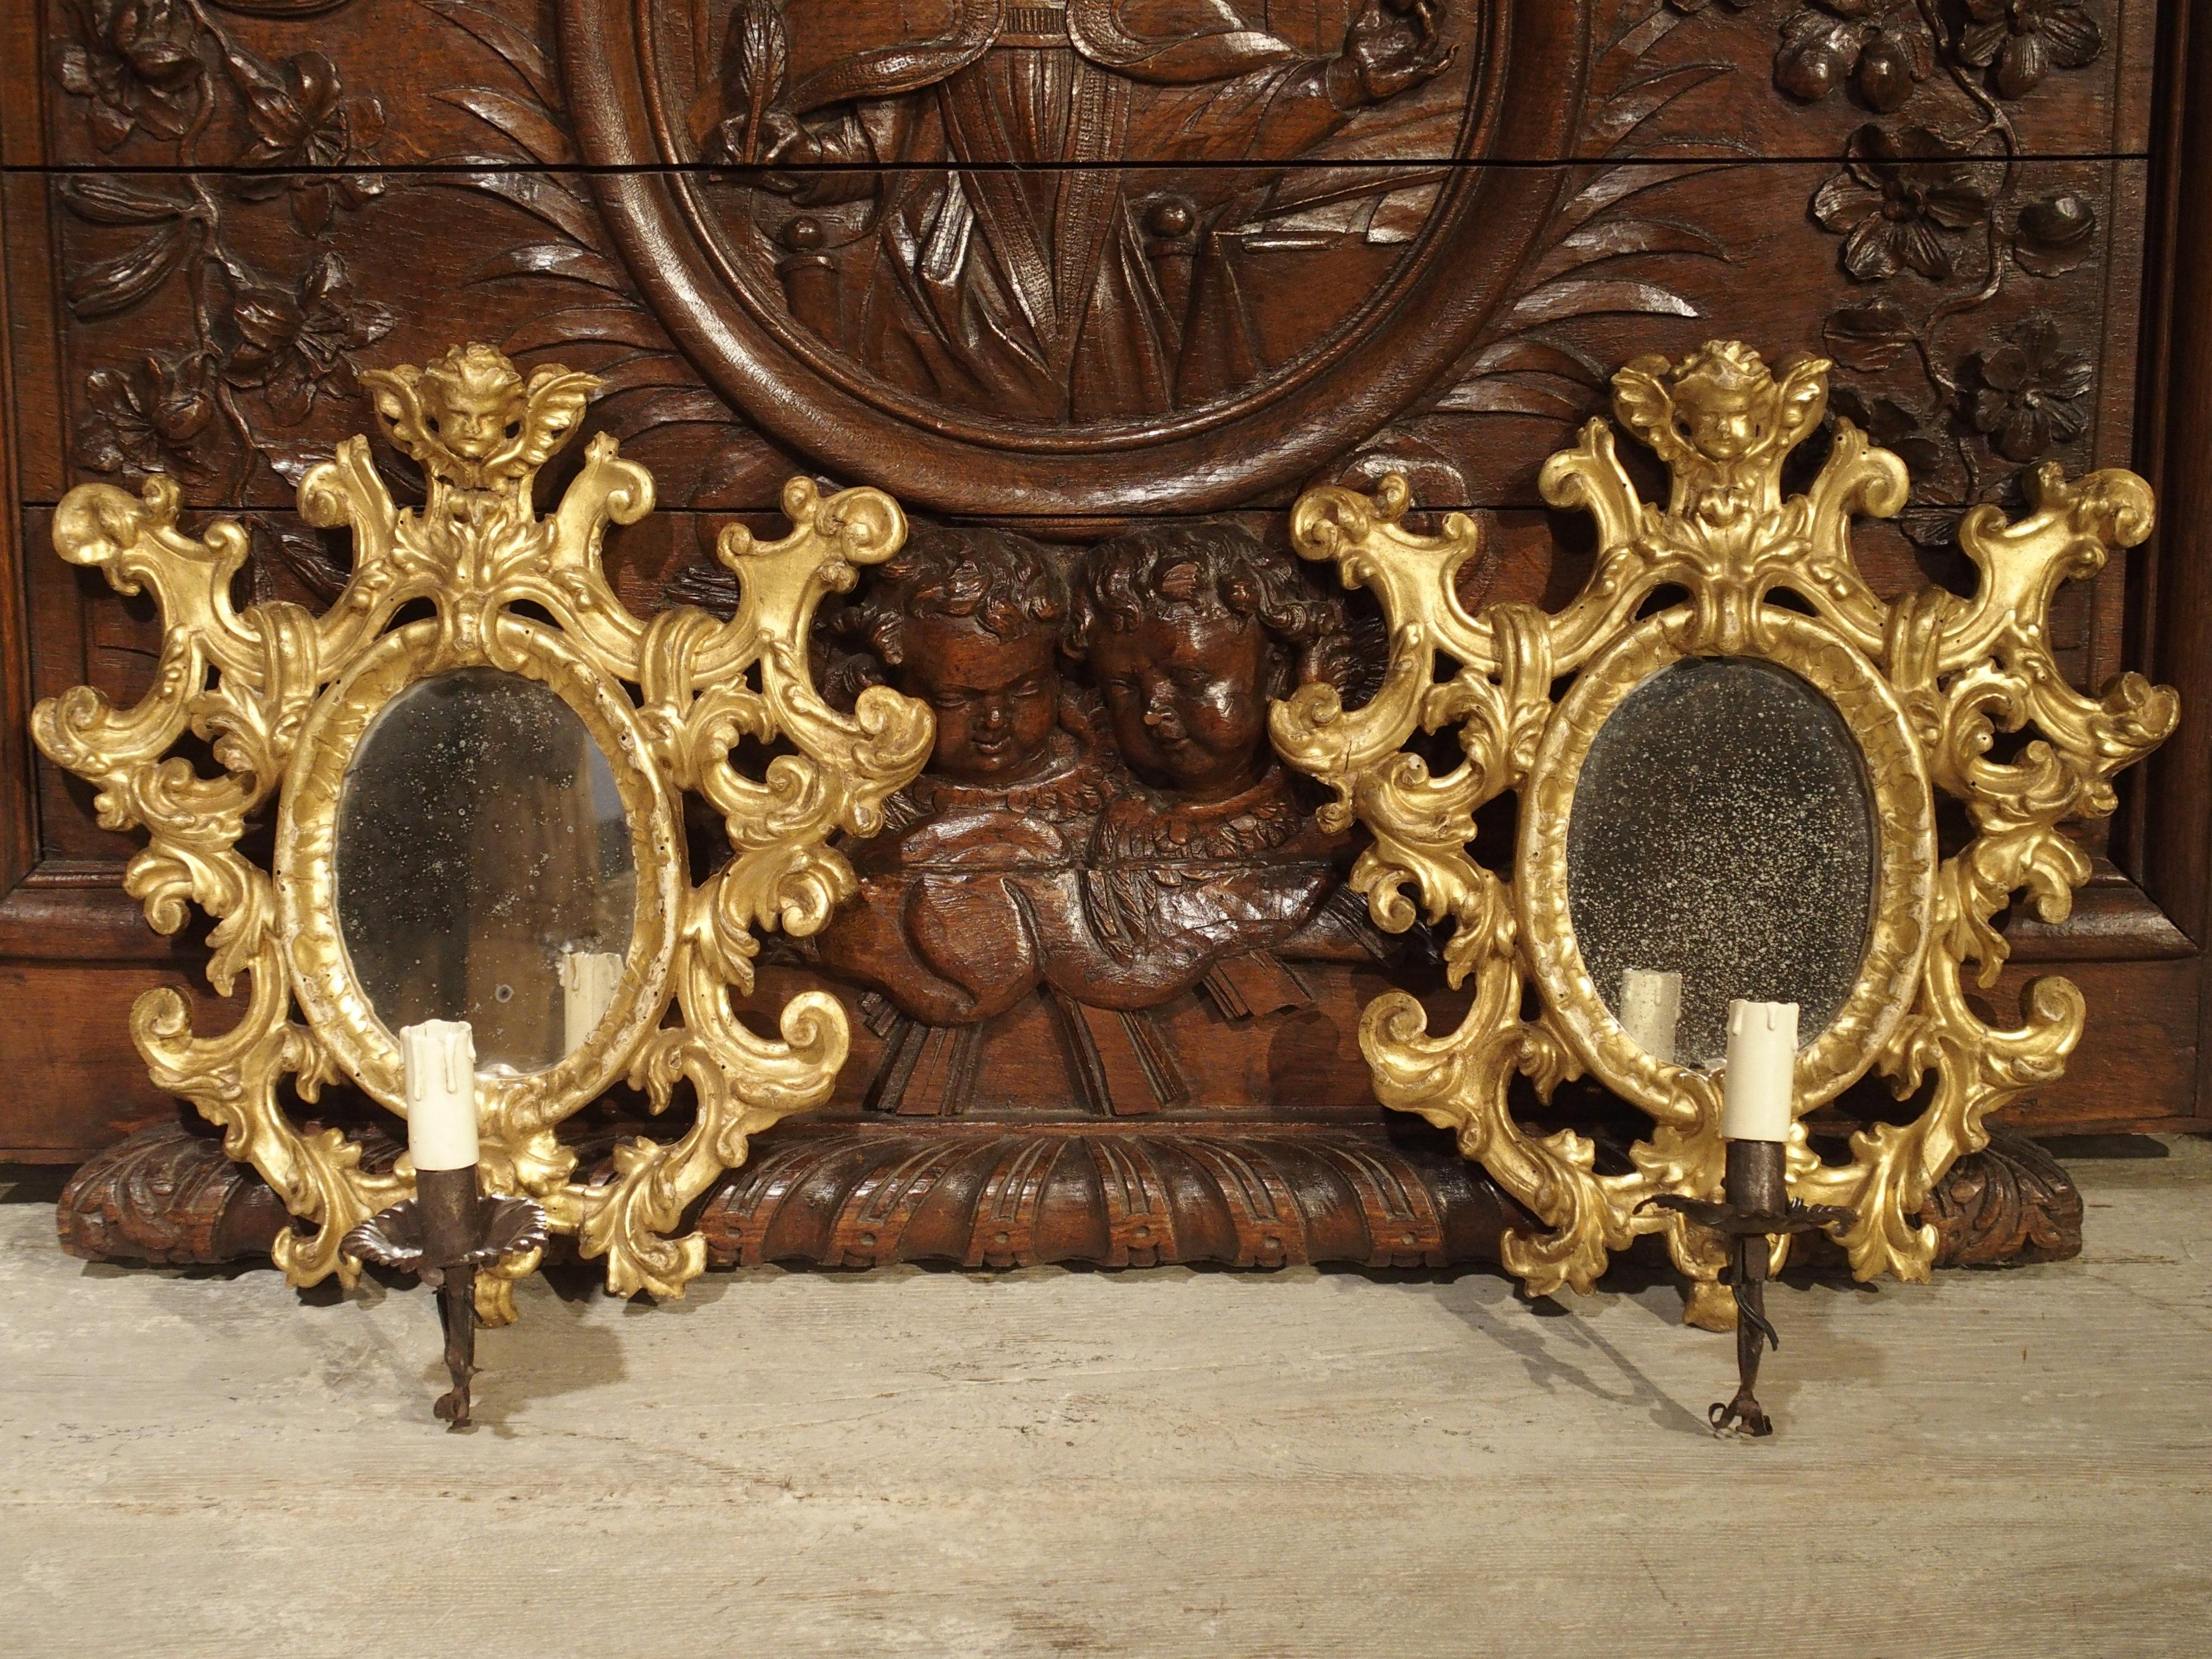 These lovely antique Italian single arm giltwood sconces date to the late 1800s. They have oval mirrors with lovely cherub motifs at the top center. The motifs surrounding the mirrors are curled C-and S-Scrolls with acanthus leaf motifs curling